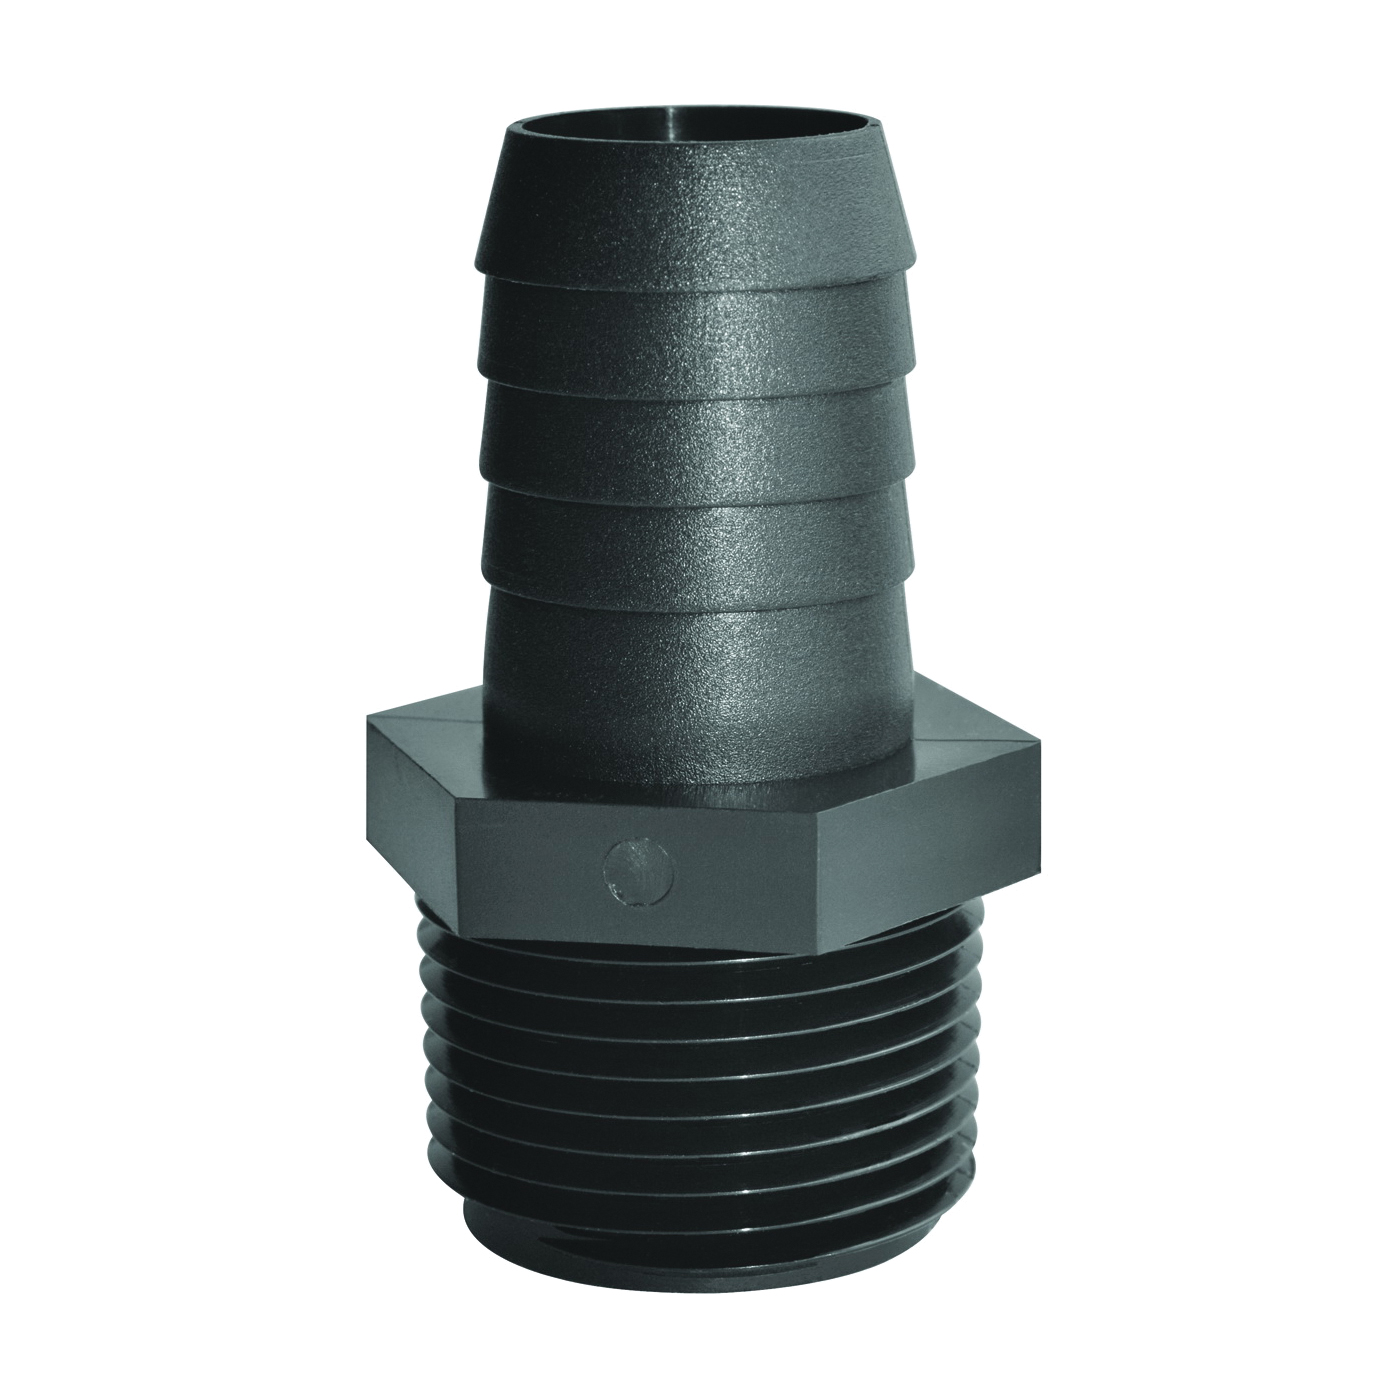 A3434P Adapter, 3/4 in, MPT x Hose Barb, Polypropylene